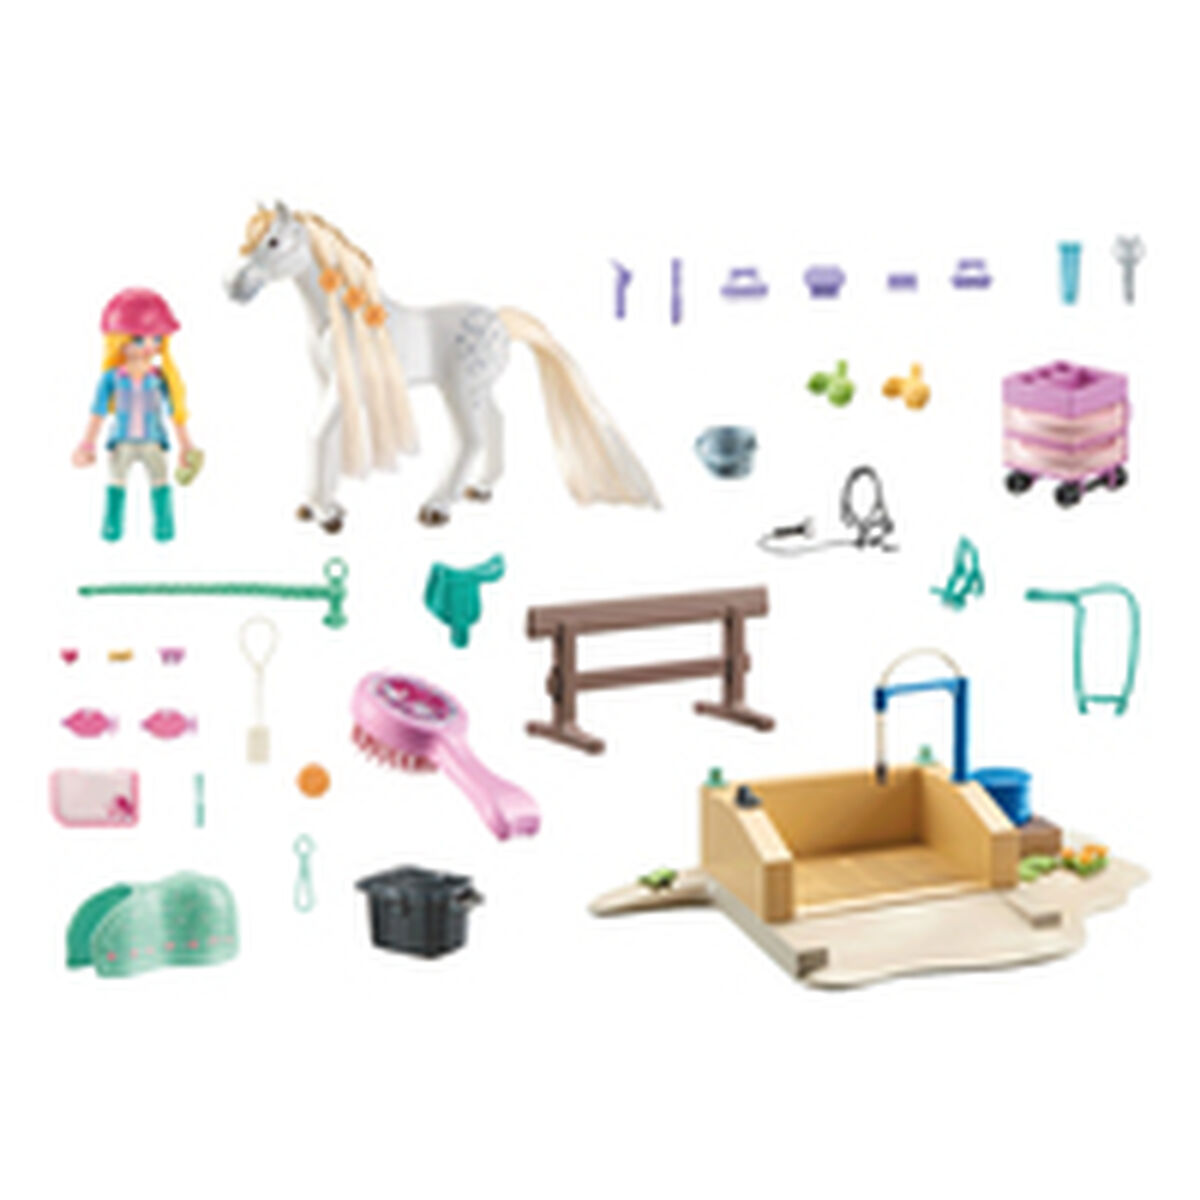 Playset Playmobil 71354 Horses of Waterfall 86 Pièces